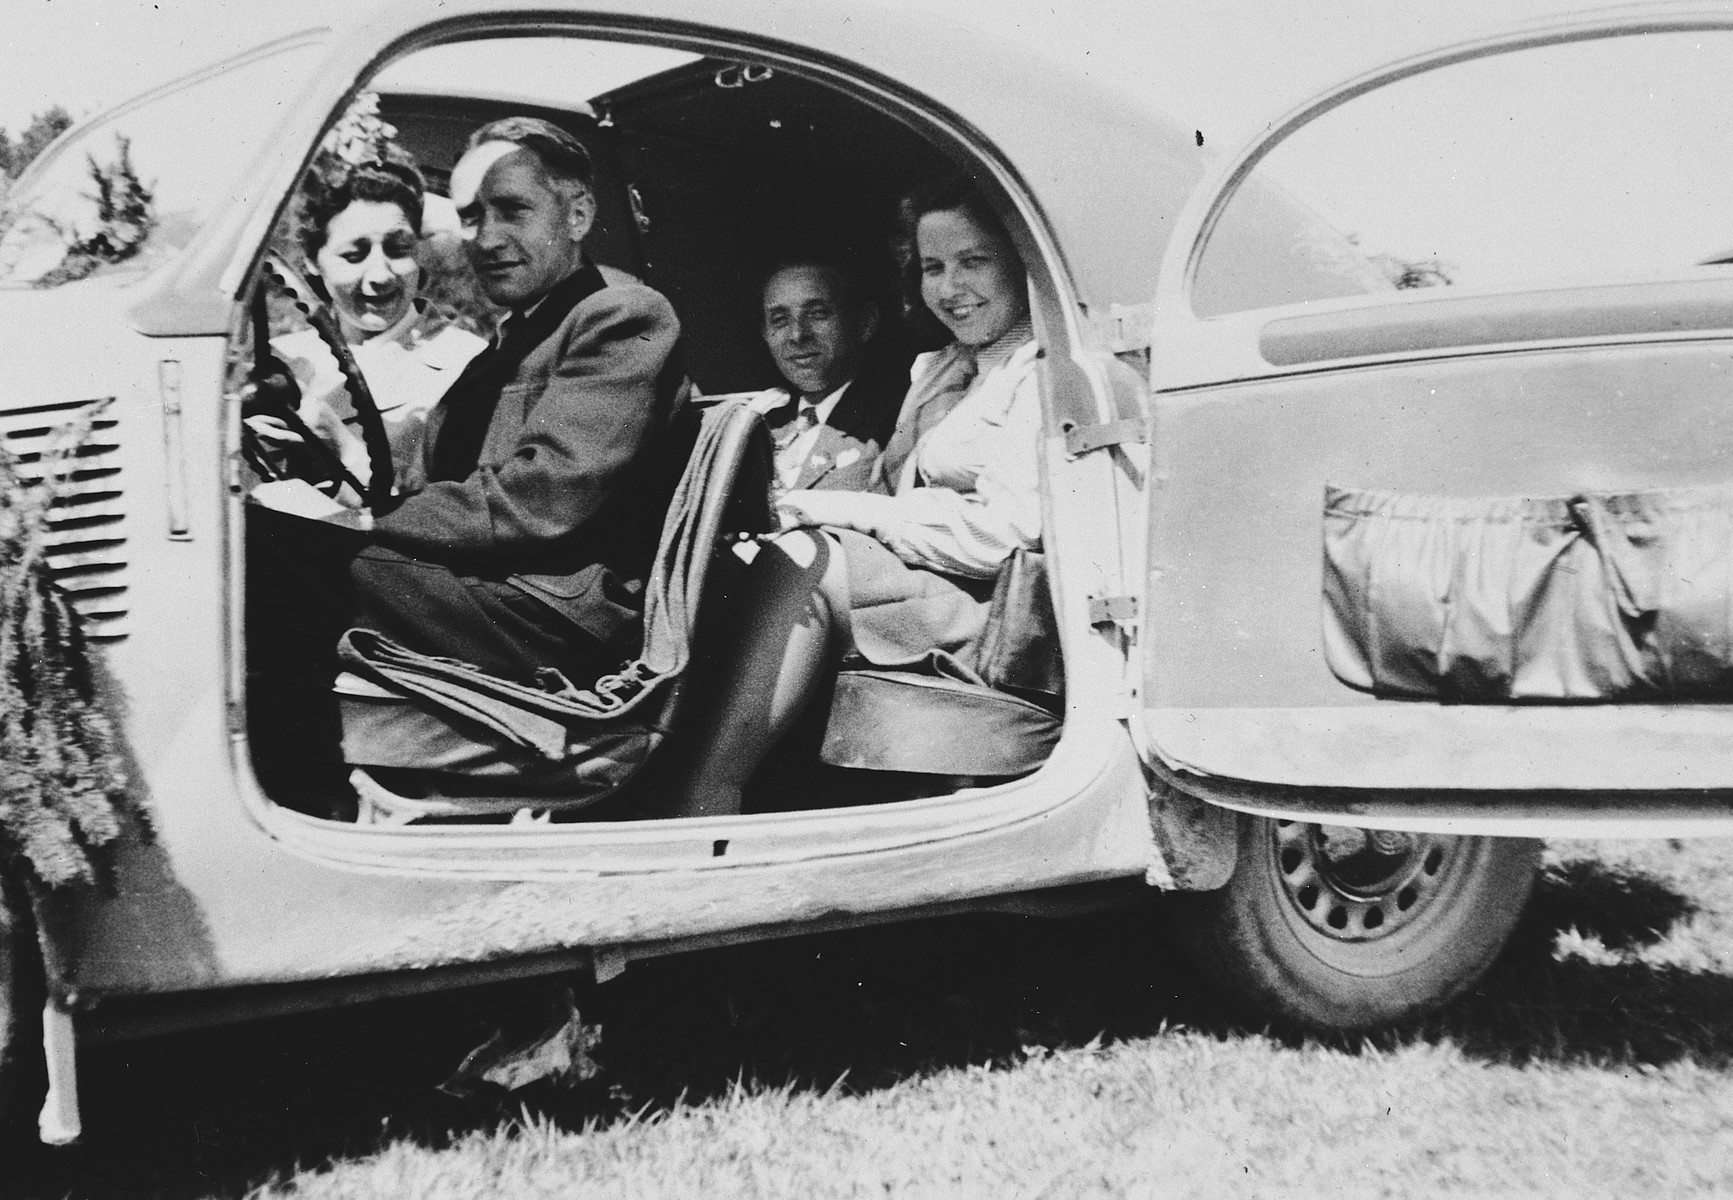 Jewish DPsfrom the Landsberg camp go for an automobile ride.

Among those pictured are Max Freidman (seated in the back seat) and his daughter-in-law Rachel, seated next to him in a white shirt and tie.